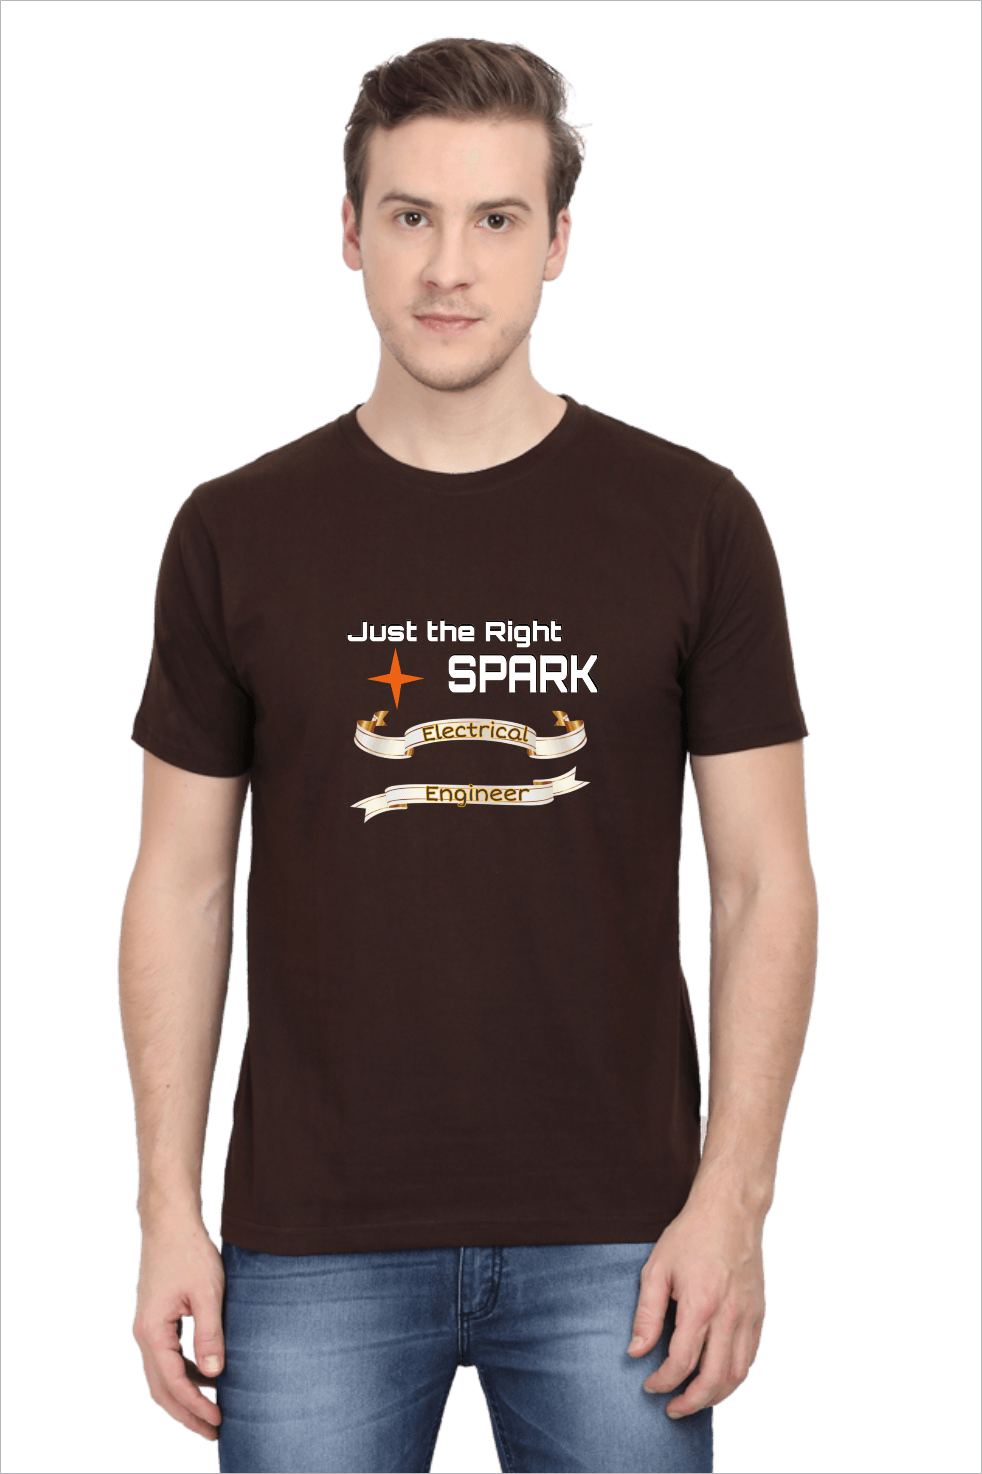 Coffee Brown Cotton Tshirt for Electrical Engineers